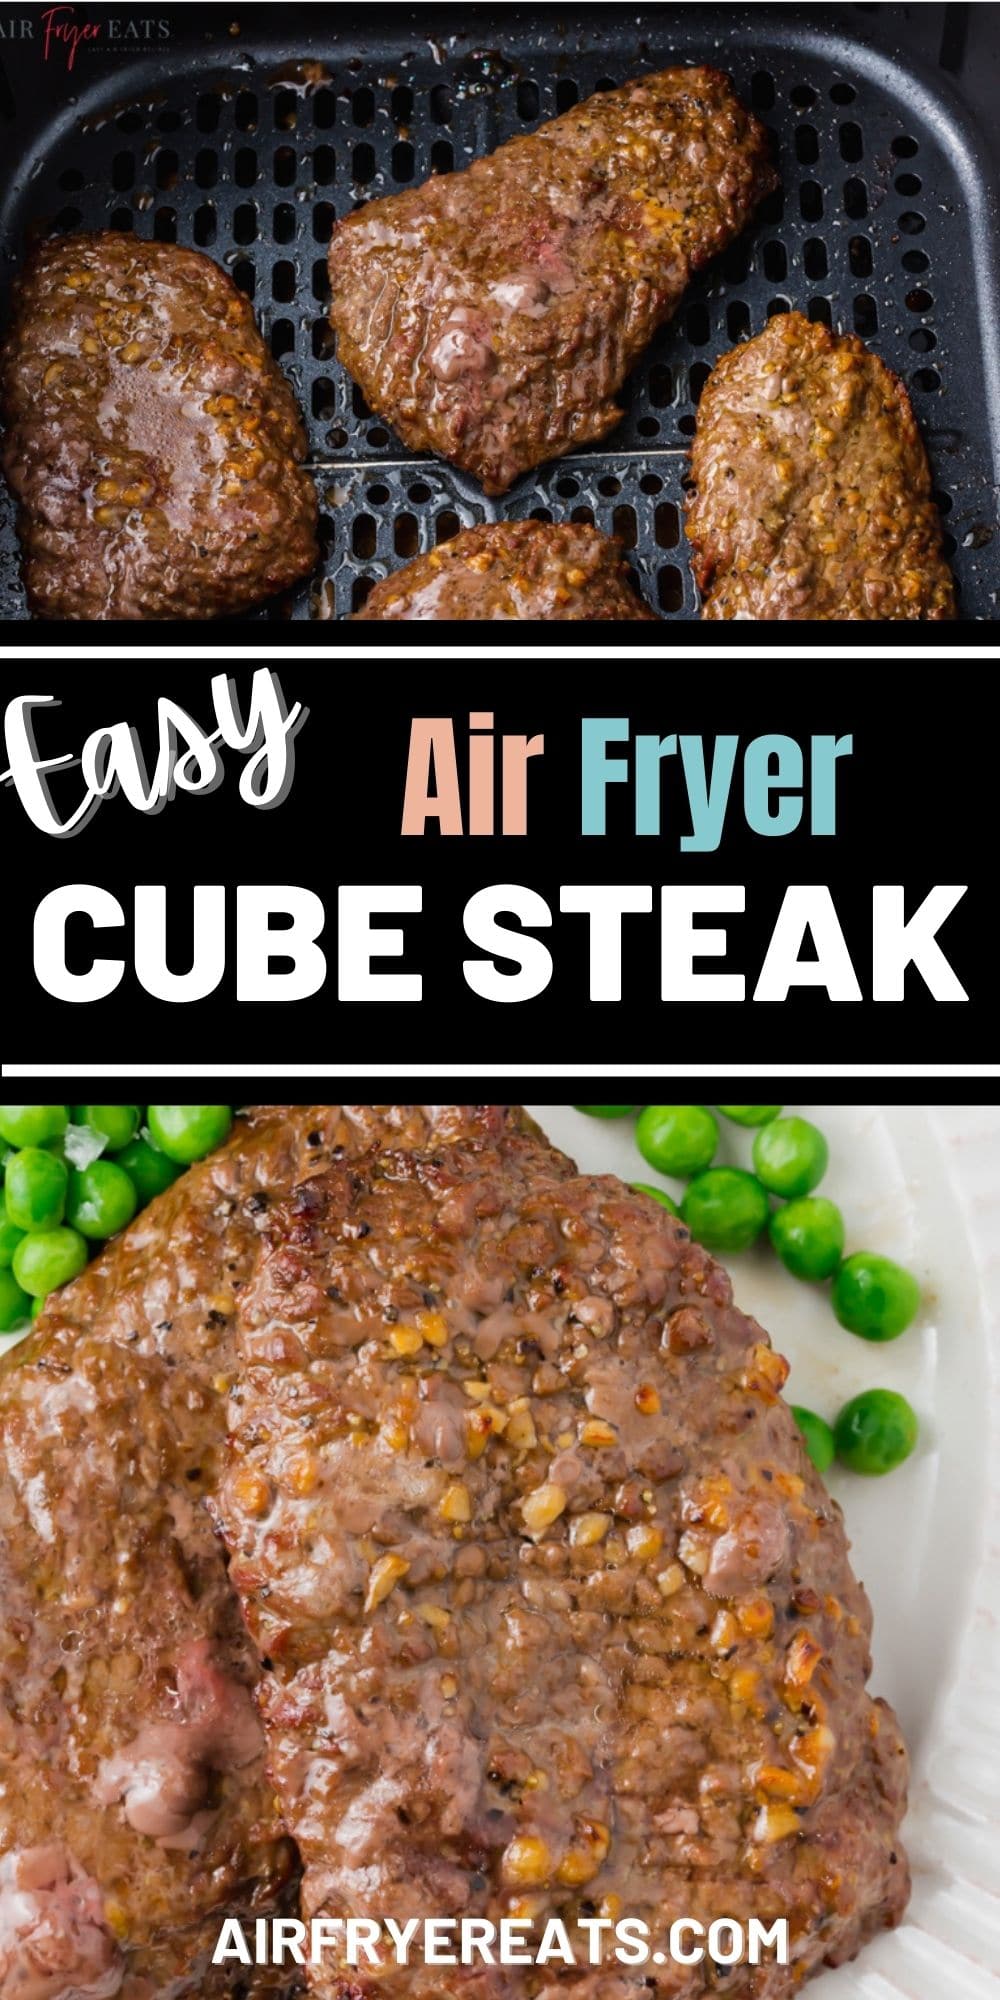 Make this savory cube steak in your air fryer in no time! we